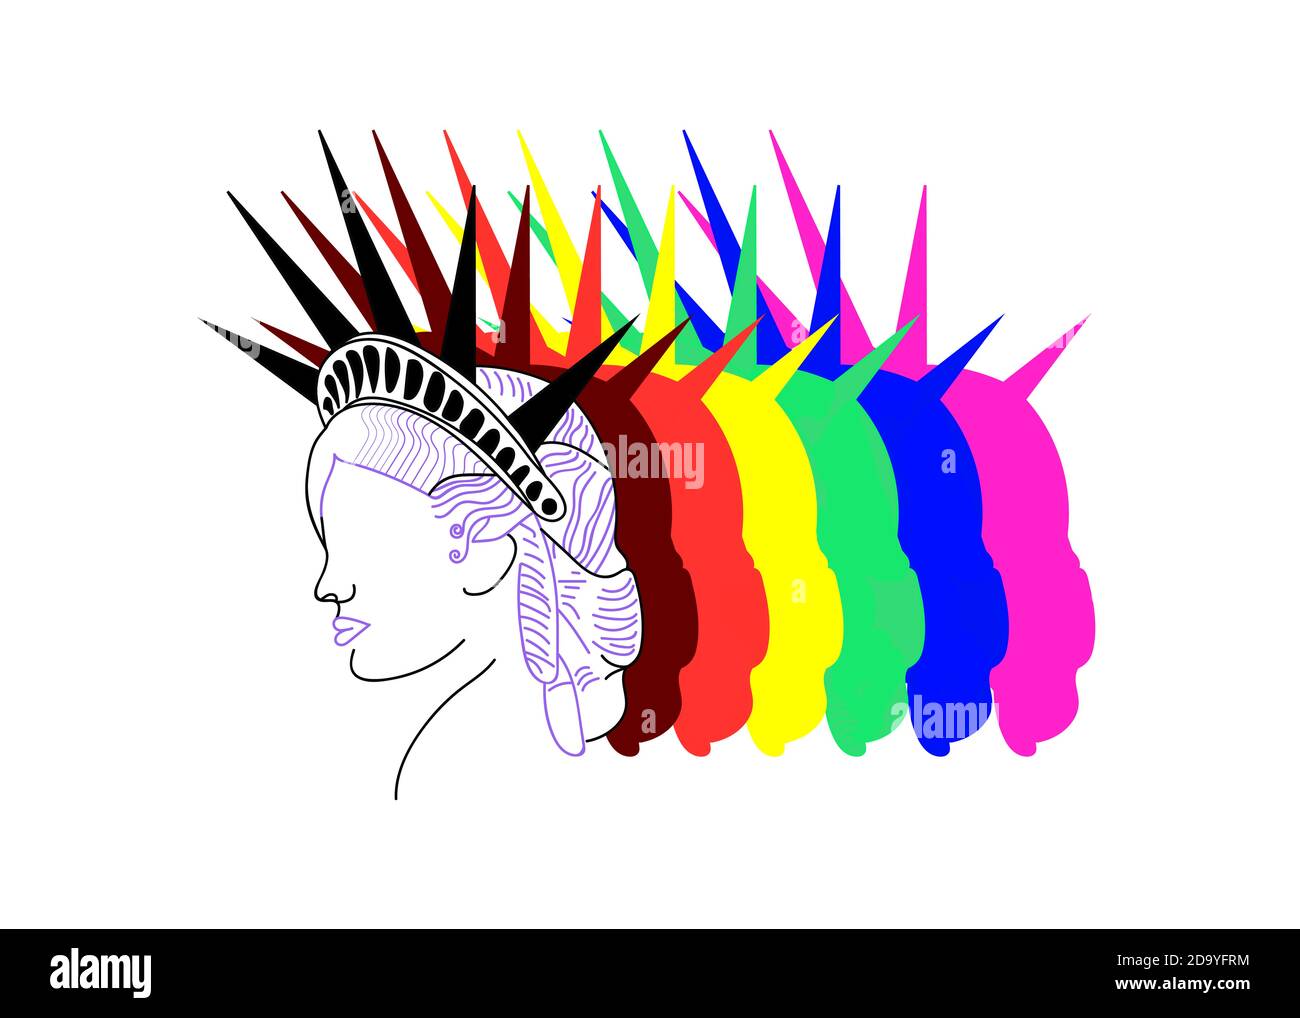 Statue of Liberty logo, illustration, LGBT changed colors Stock Photo